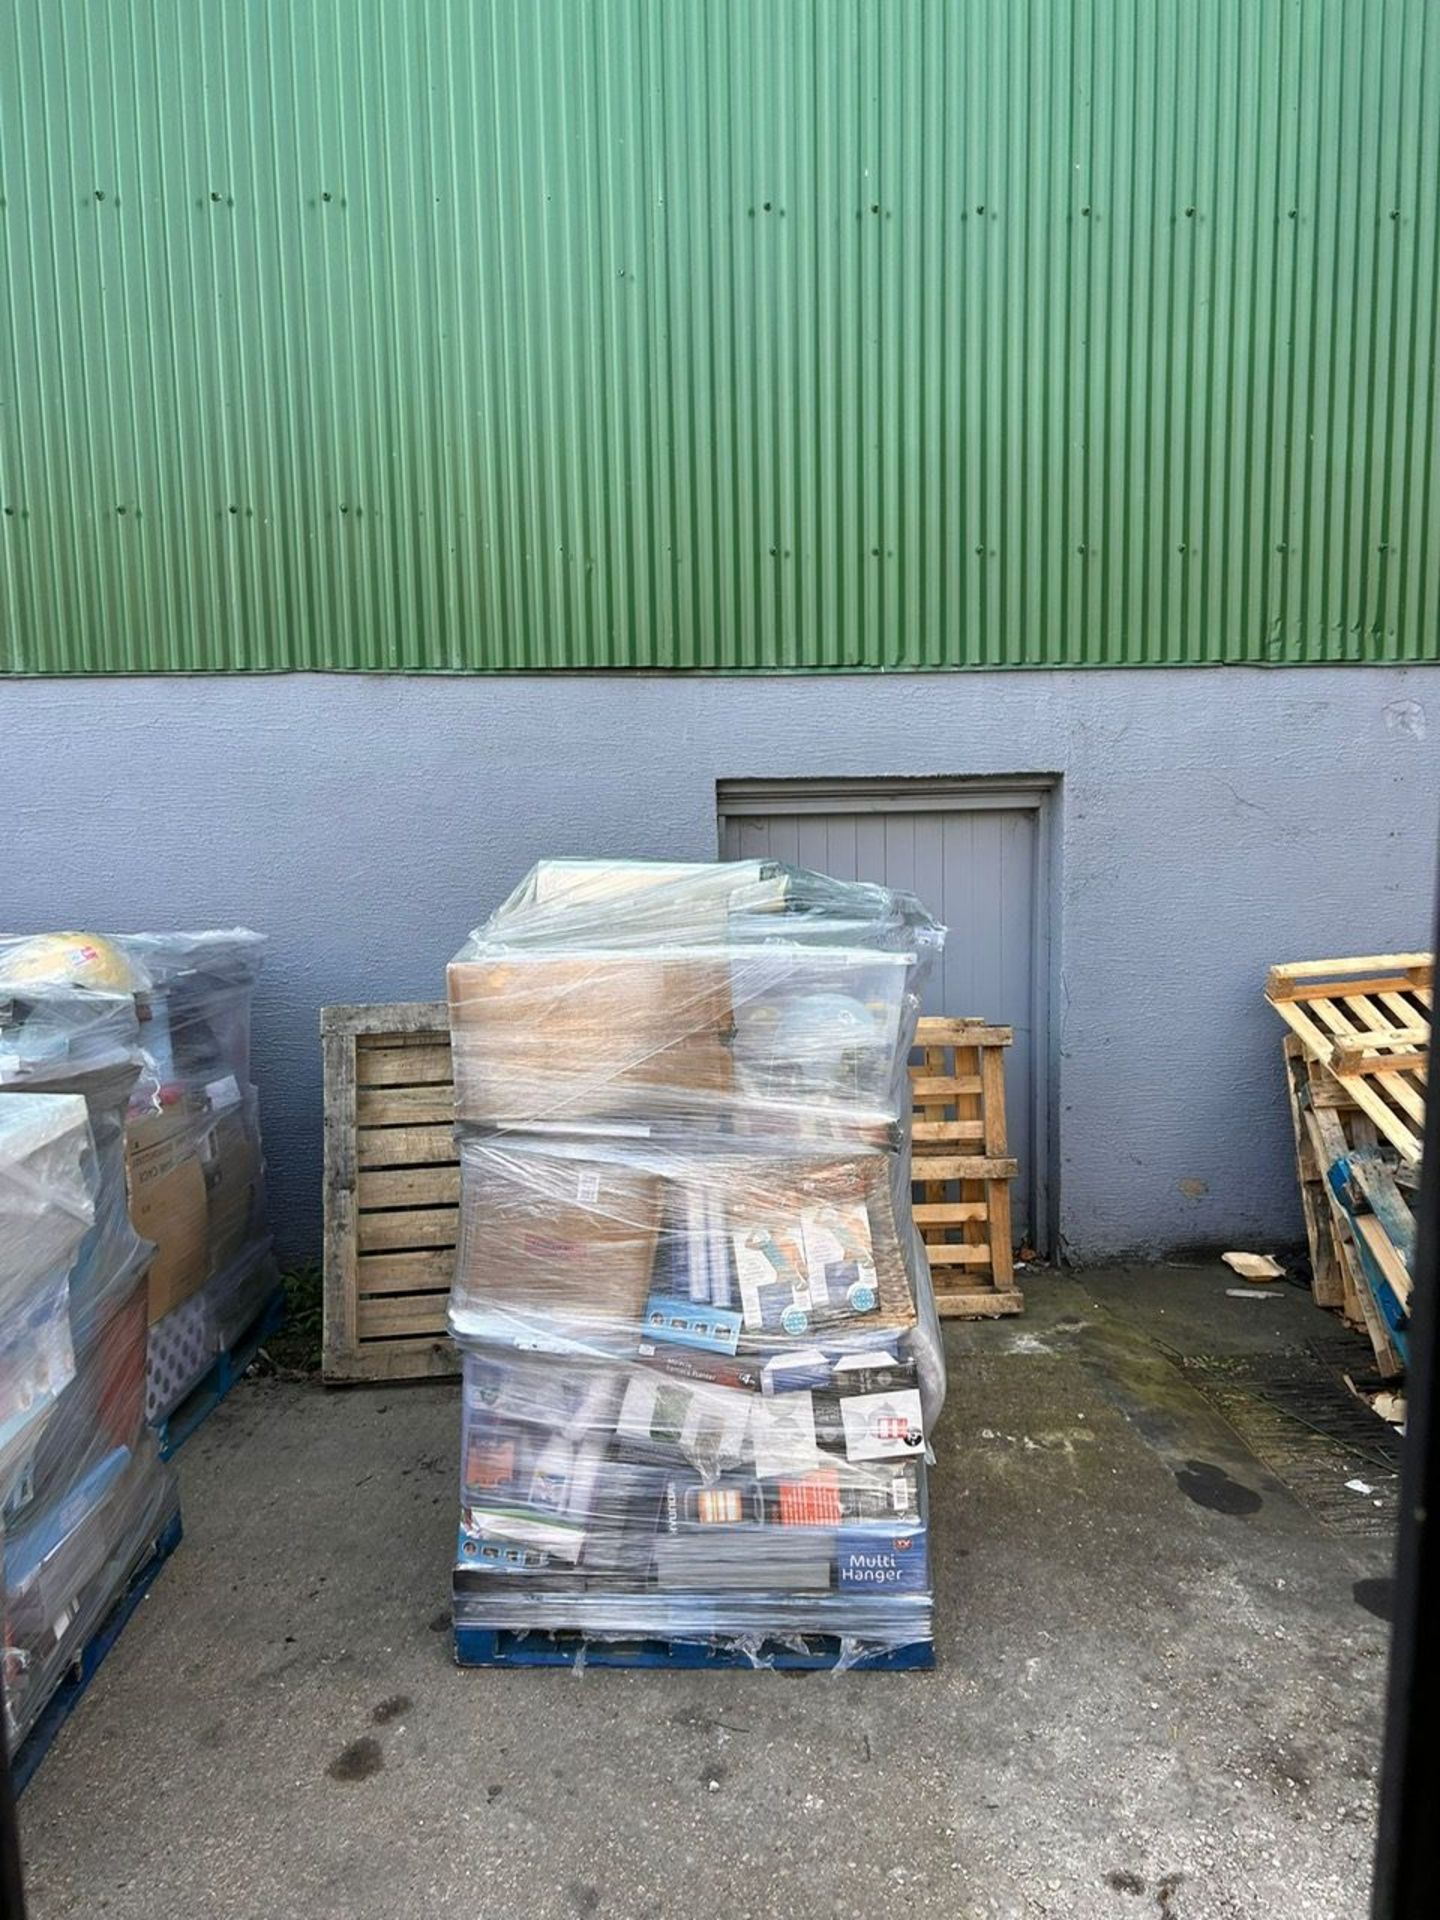 10 x Large Pallets of Unchecked Supermarket Stock. Huge variety of items which may include: tools, - Image 15 of 18